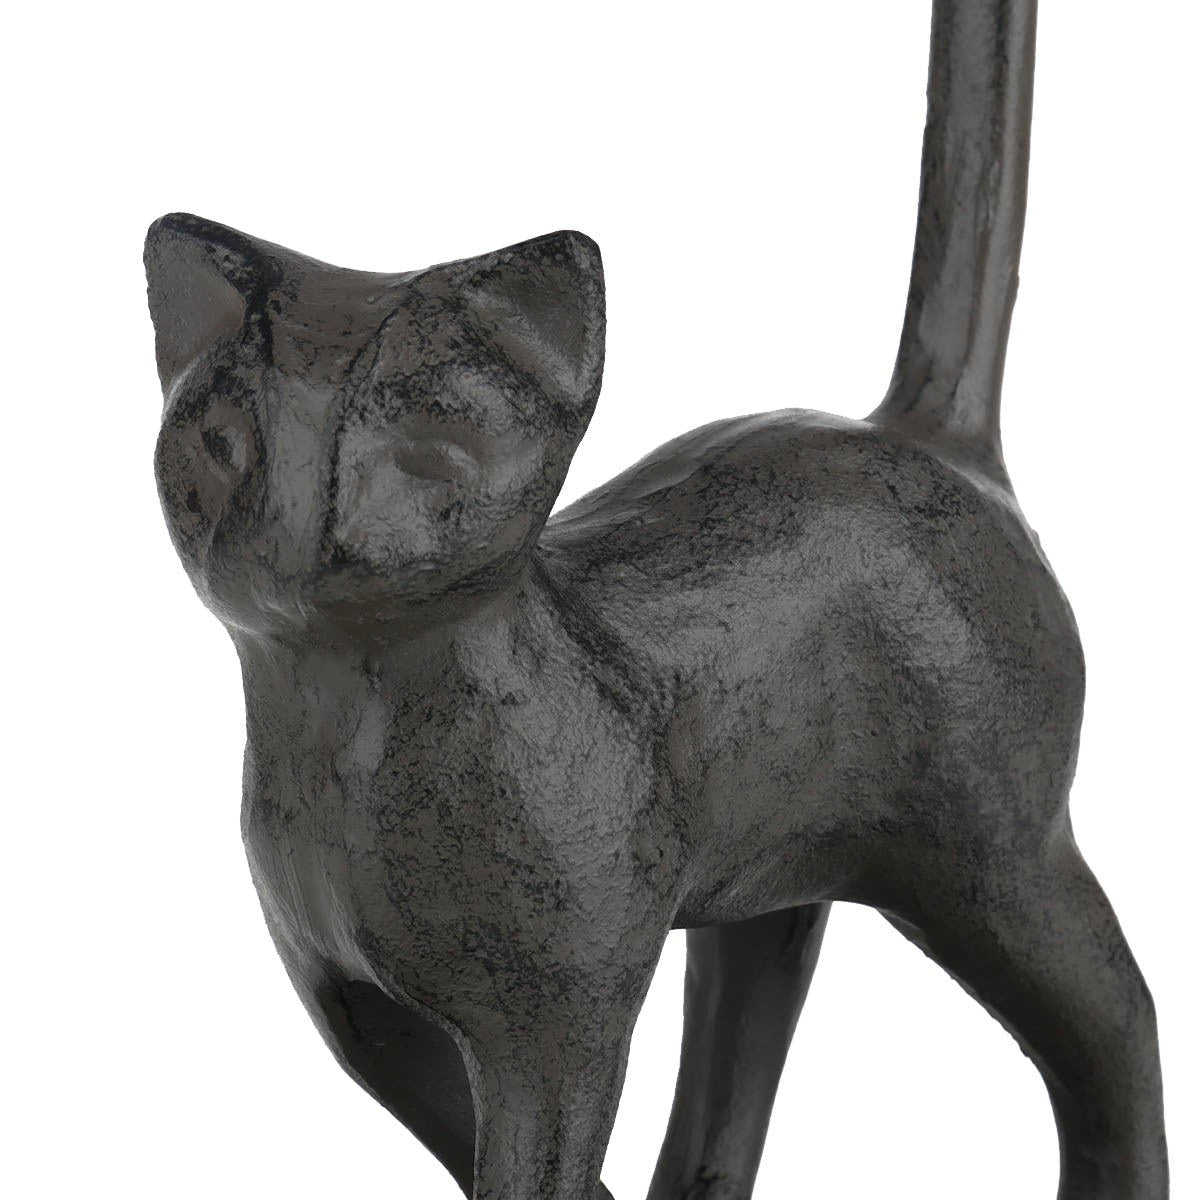 Cat paper towel holder it funny in your dinner table, kitchen countertop!